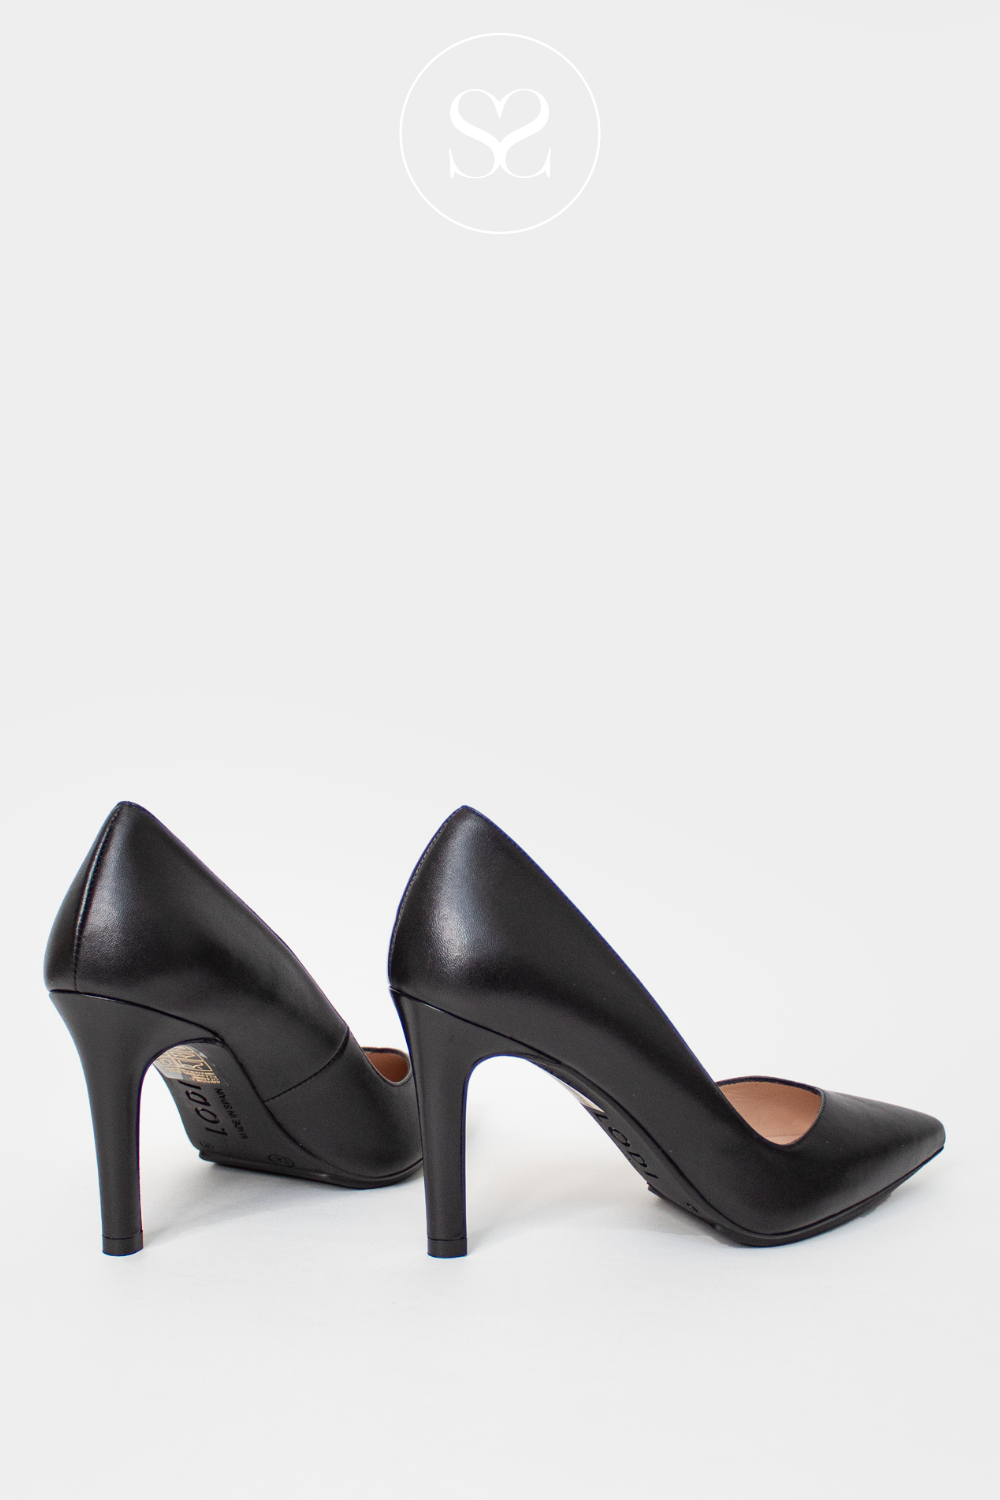 LODI RABOT BLACK LEATHER HIGH HEEL COURT SHOE WITH V-CUT AND STILETTO HEEL